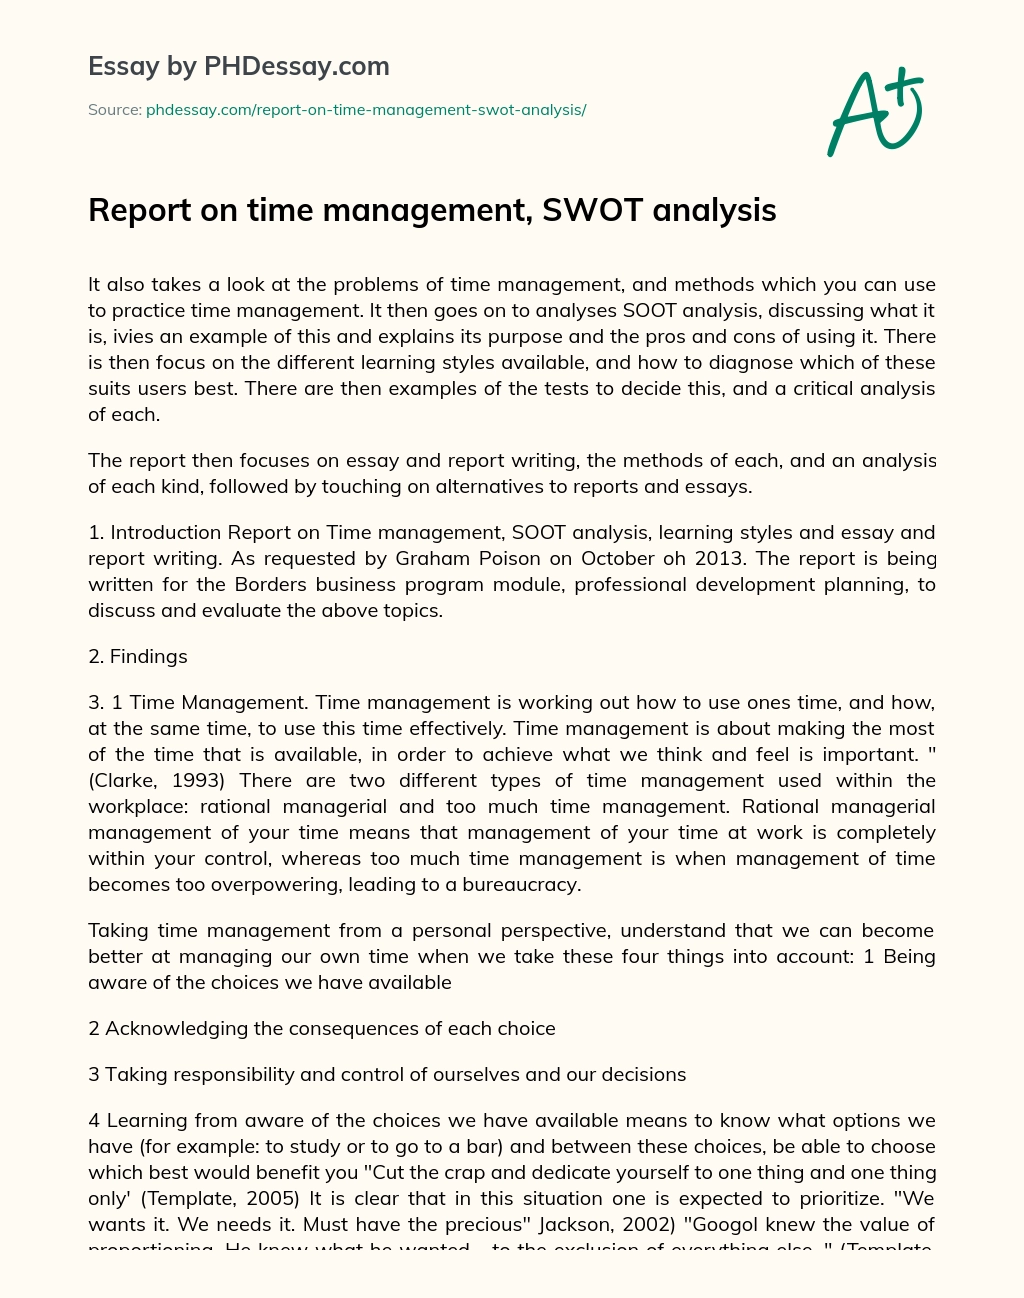 Report on time management, SWOT analysis essay